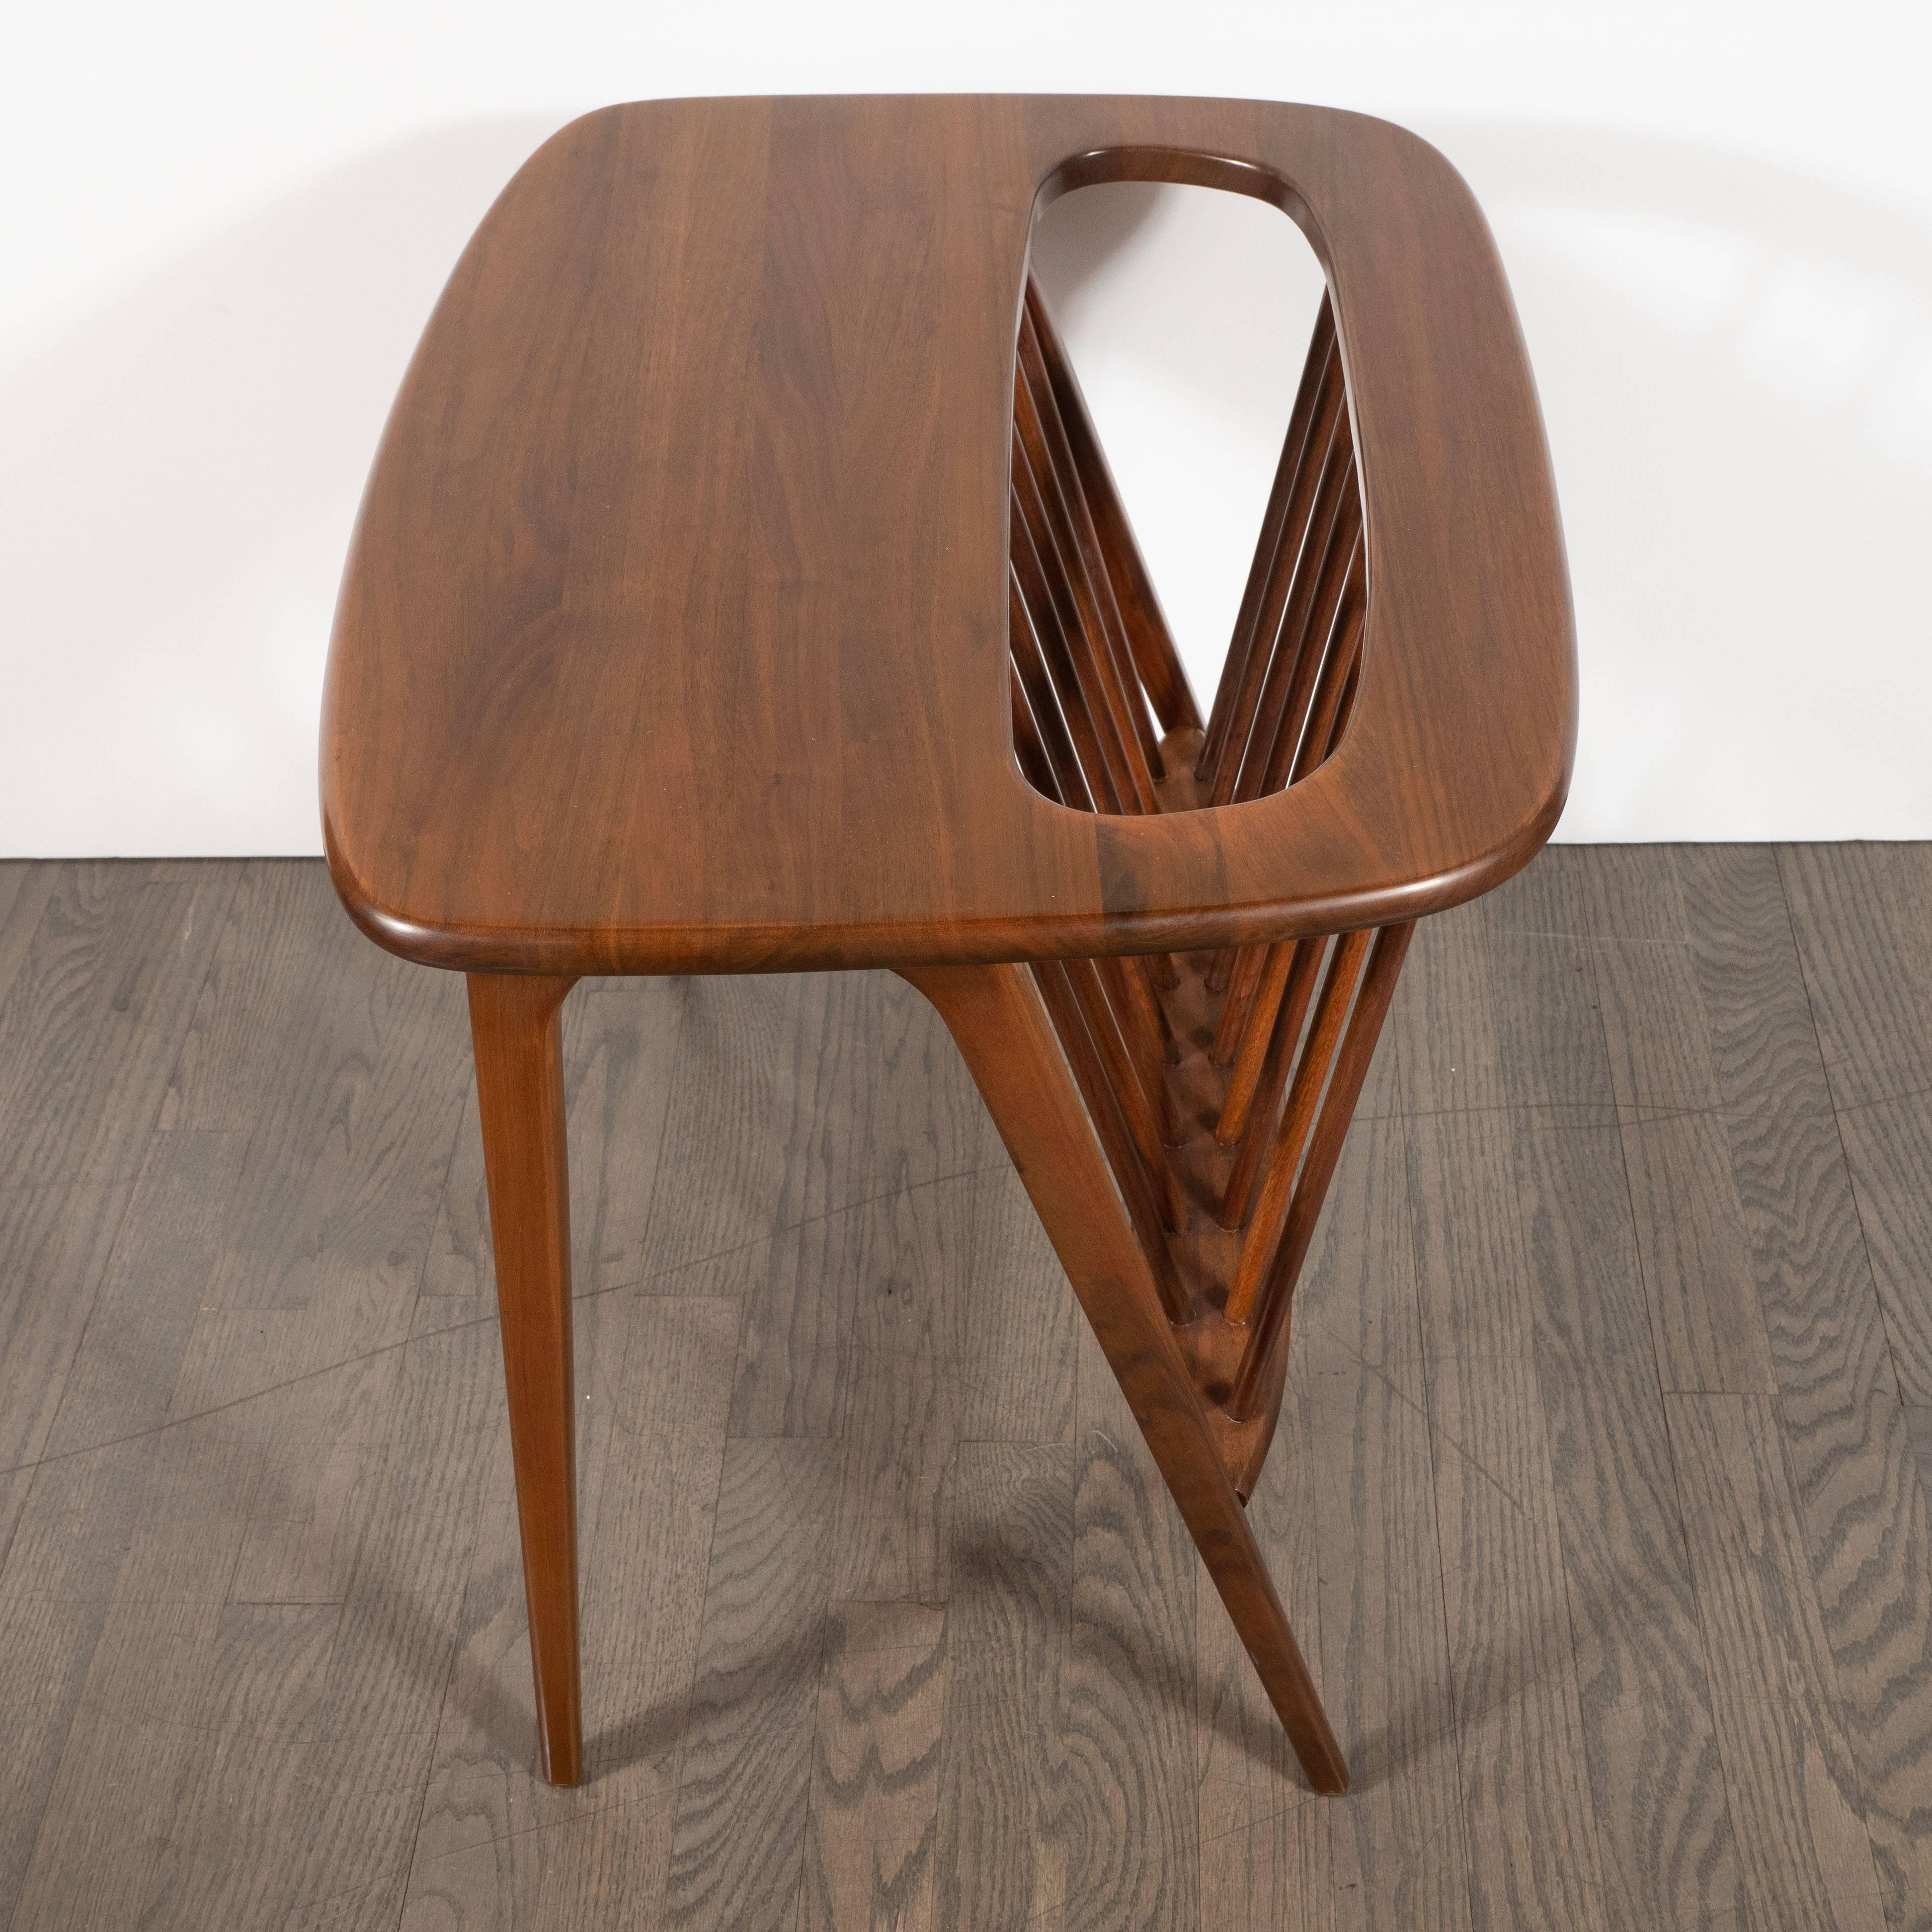 Mid-20th Century Mid-Century Modern Magazine Holder/ Side Table in Hand Rubbed Bookmatched Walnut